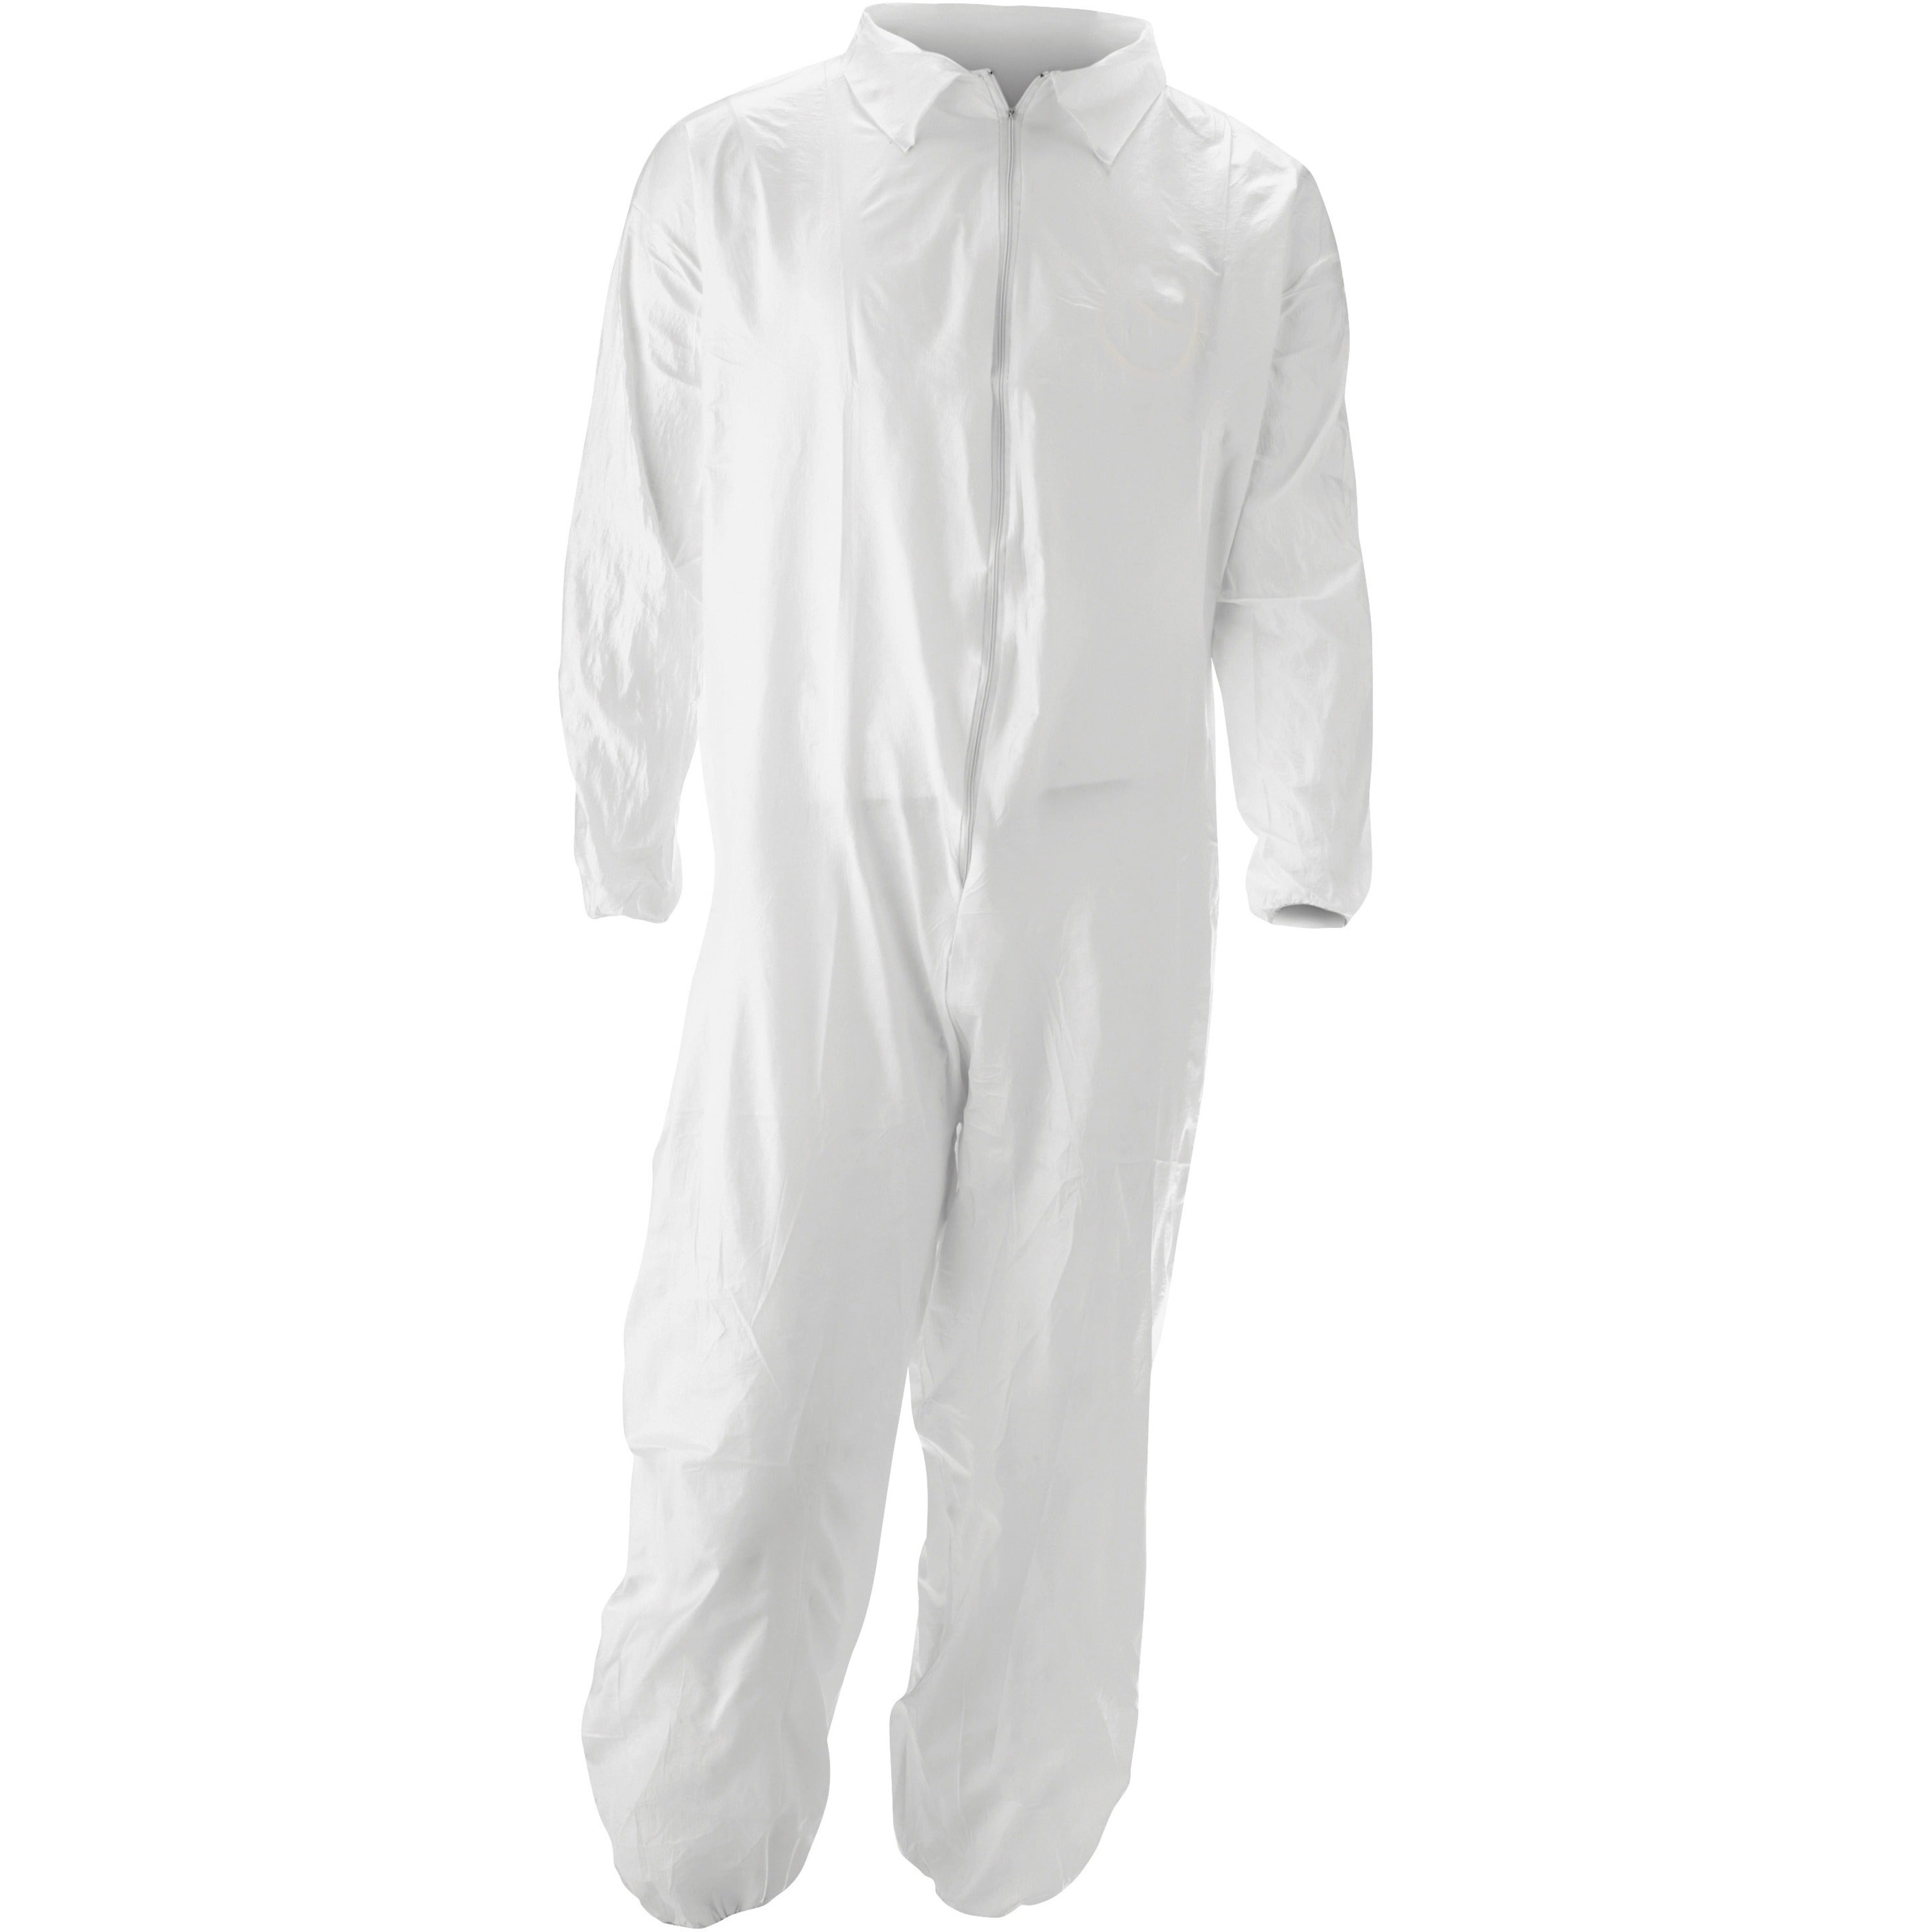 malt-promax-coverall-recommended-for-chemical-painting-food-processing-pesticide-spraying-asbestos-abatement-large-size-zipper-closure-polyolefin-white-25-carton_impm1017l - 1